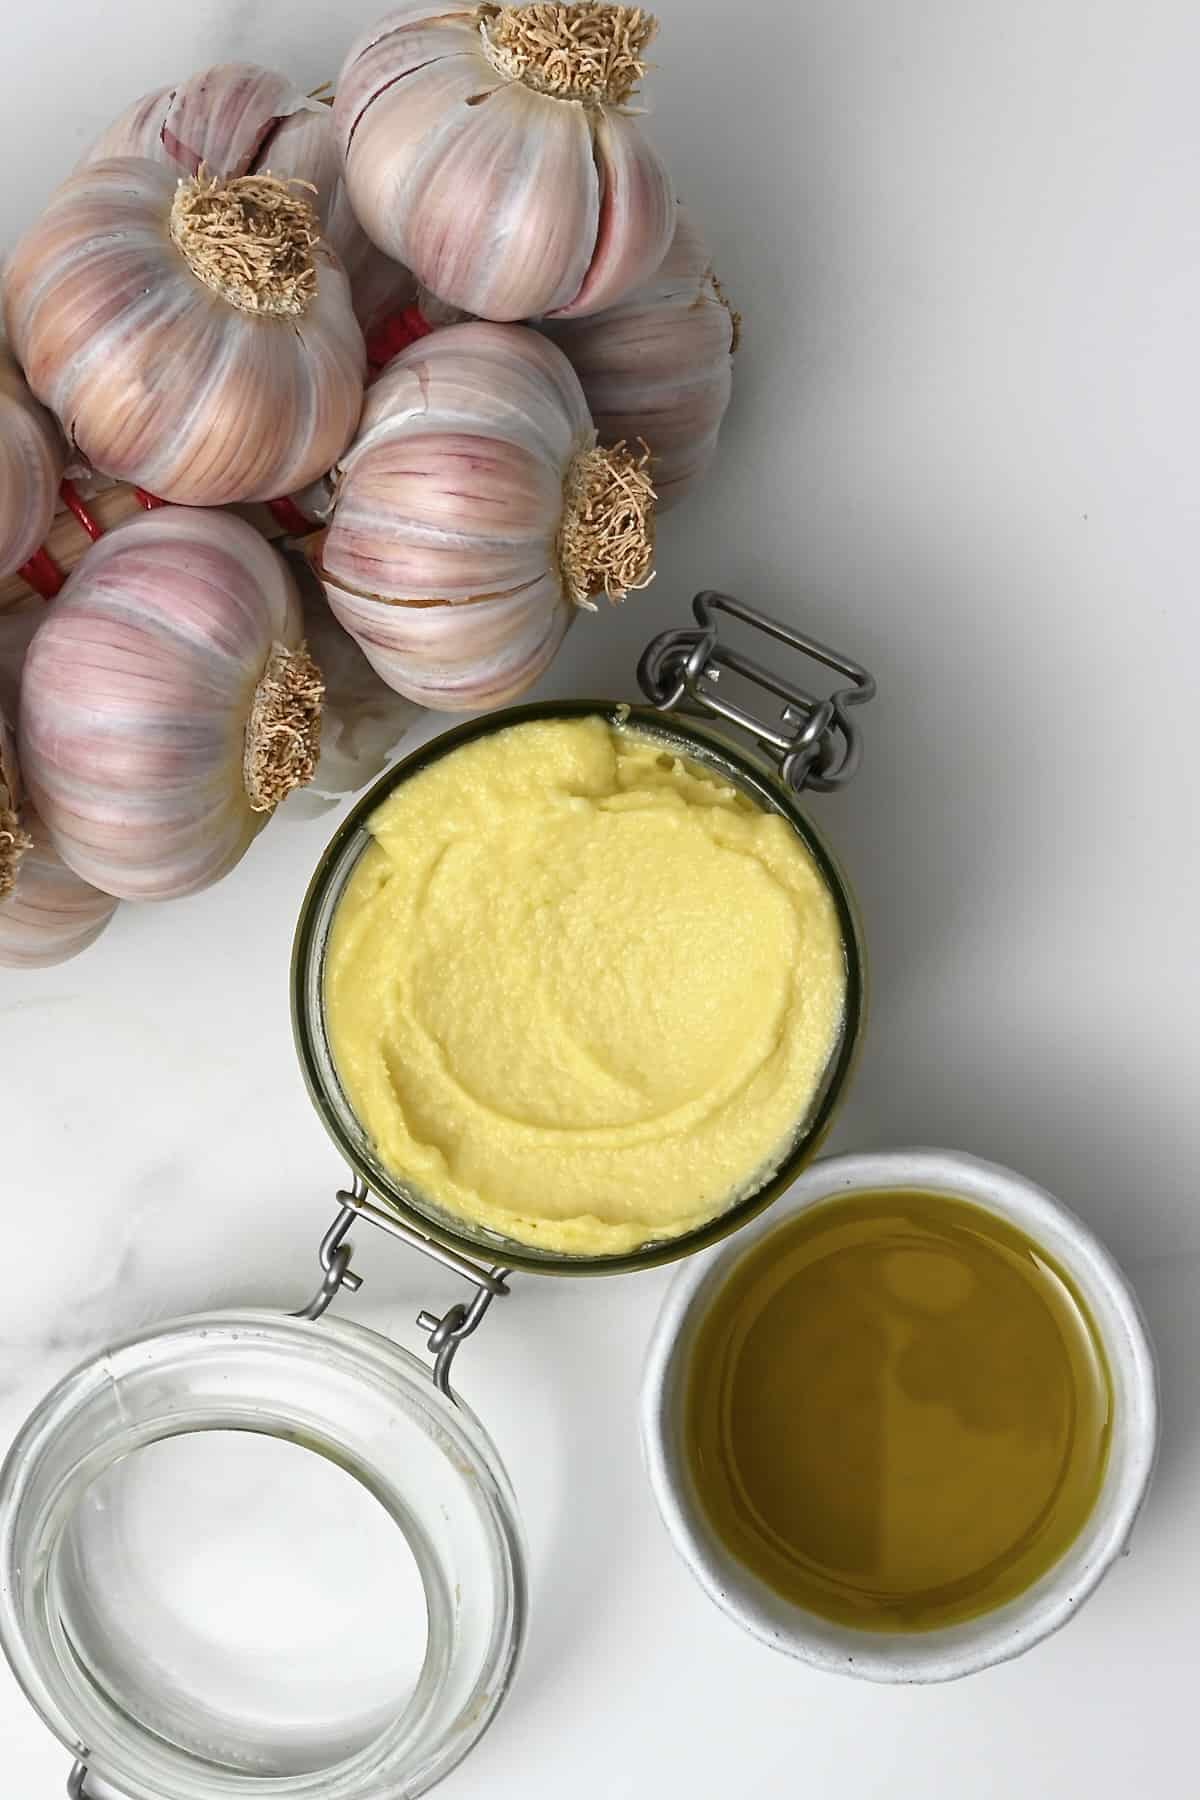 Homemade garlic aioli in a jar next to garlic heads and olive oil